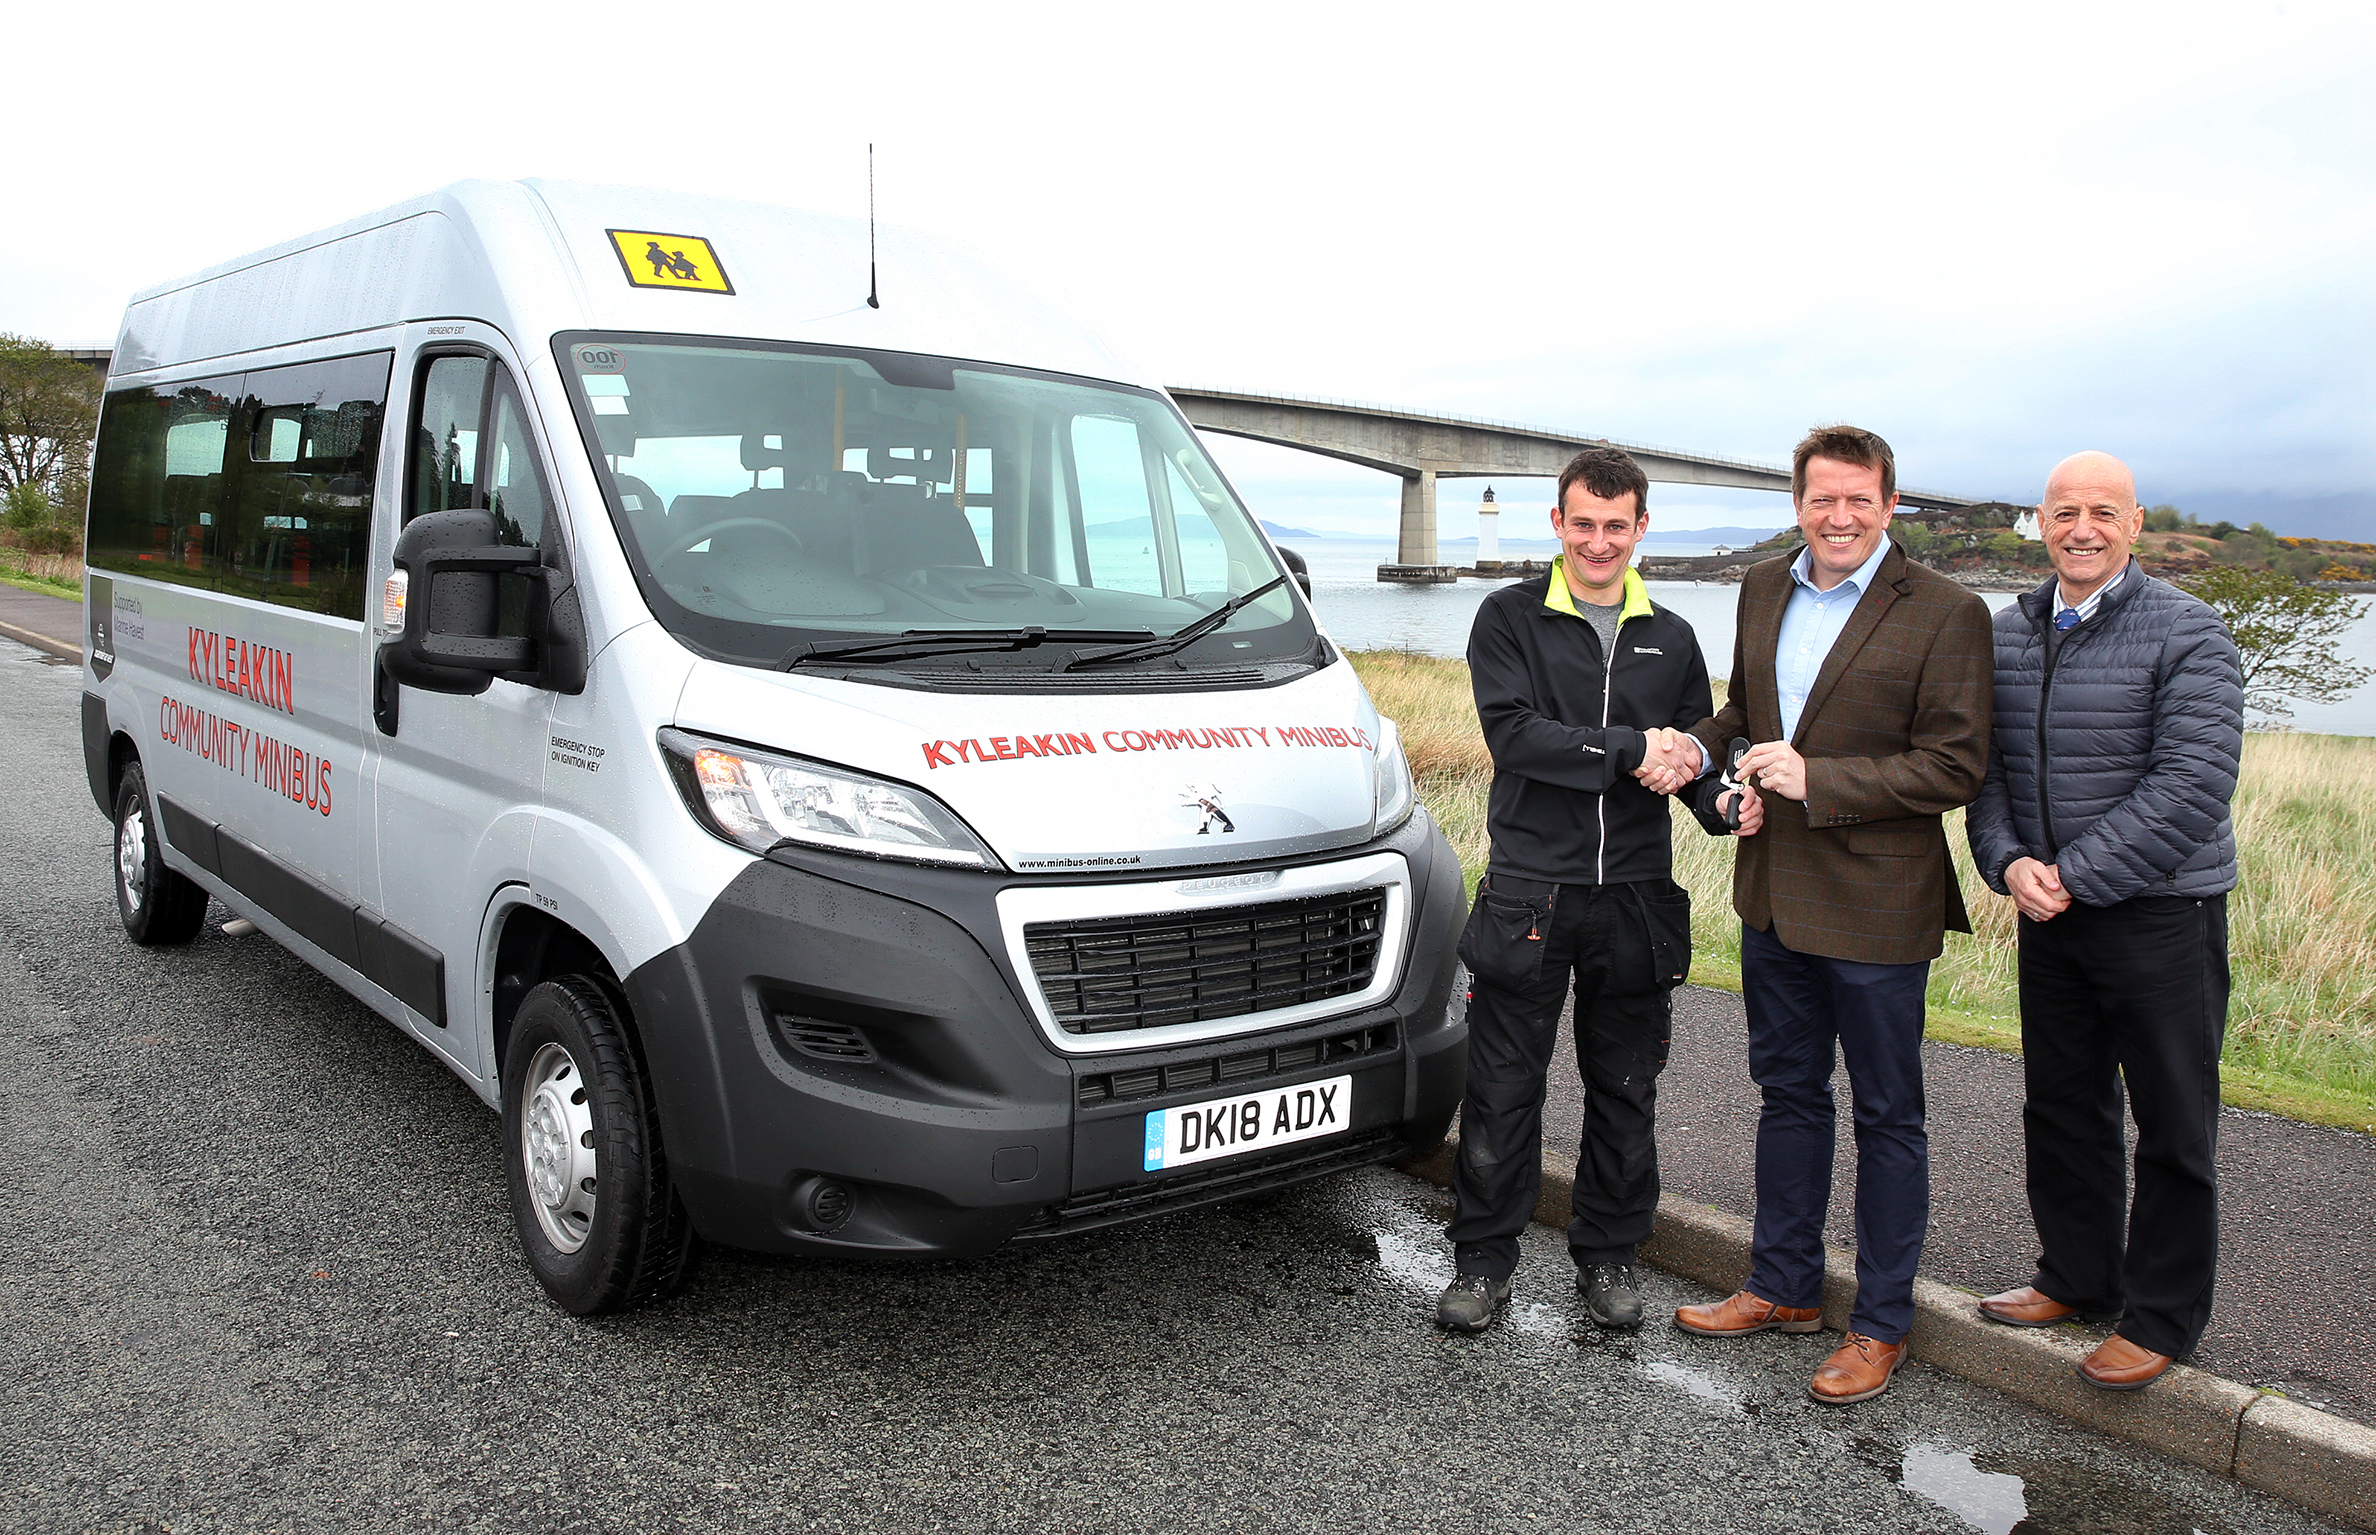 Michael Taylor, Chairman of Kyleakin Community Minibus Group, receives the keys from Marine Harvest’s Kevin O’Leary and councillor John Finlayson